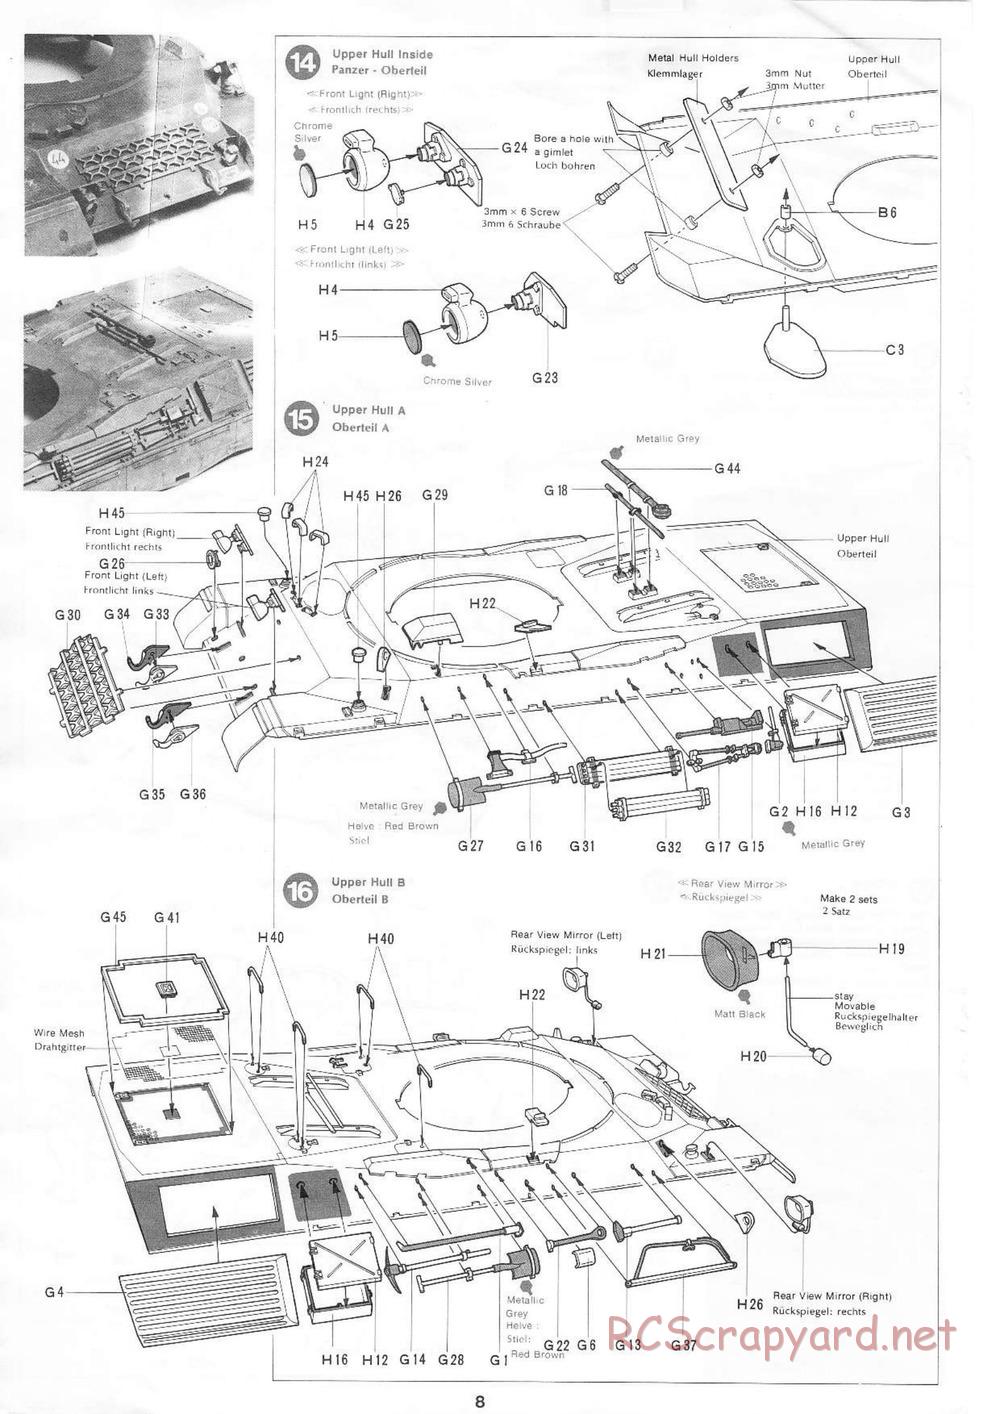 Tamiya - Leopard A4 - 1/16 Scale Chassis - Manual - Page 8